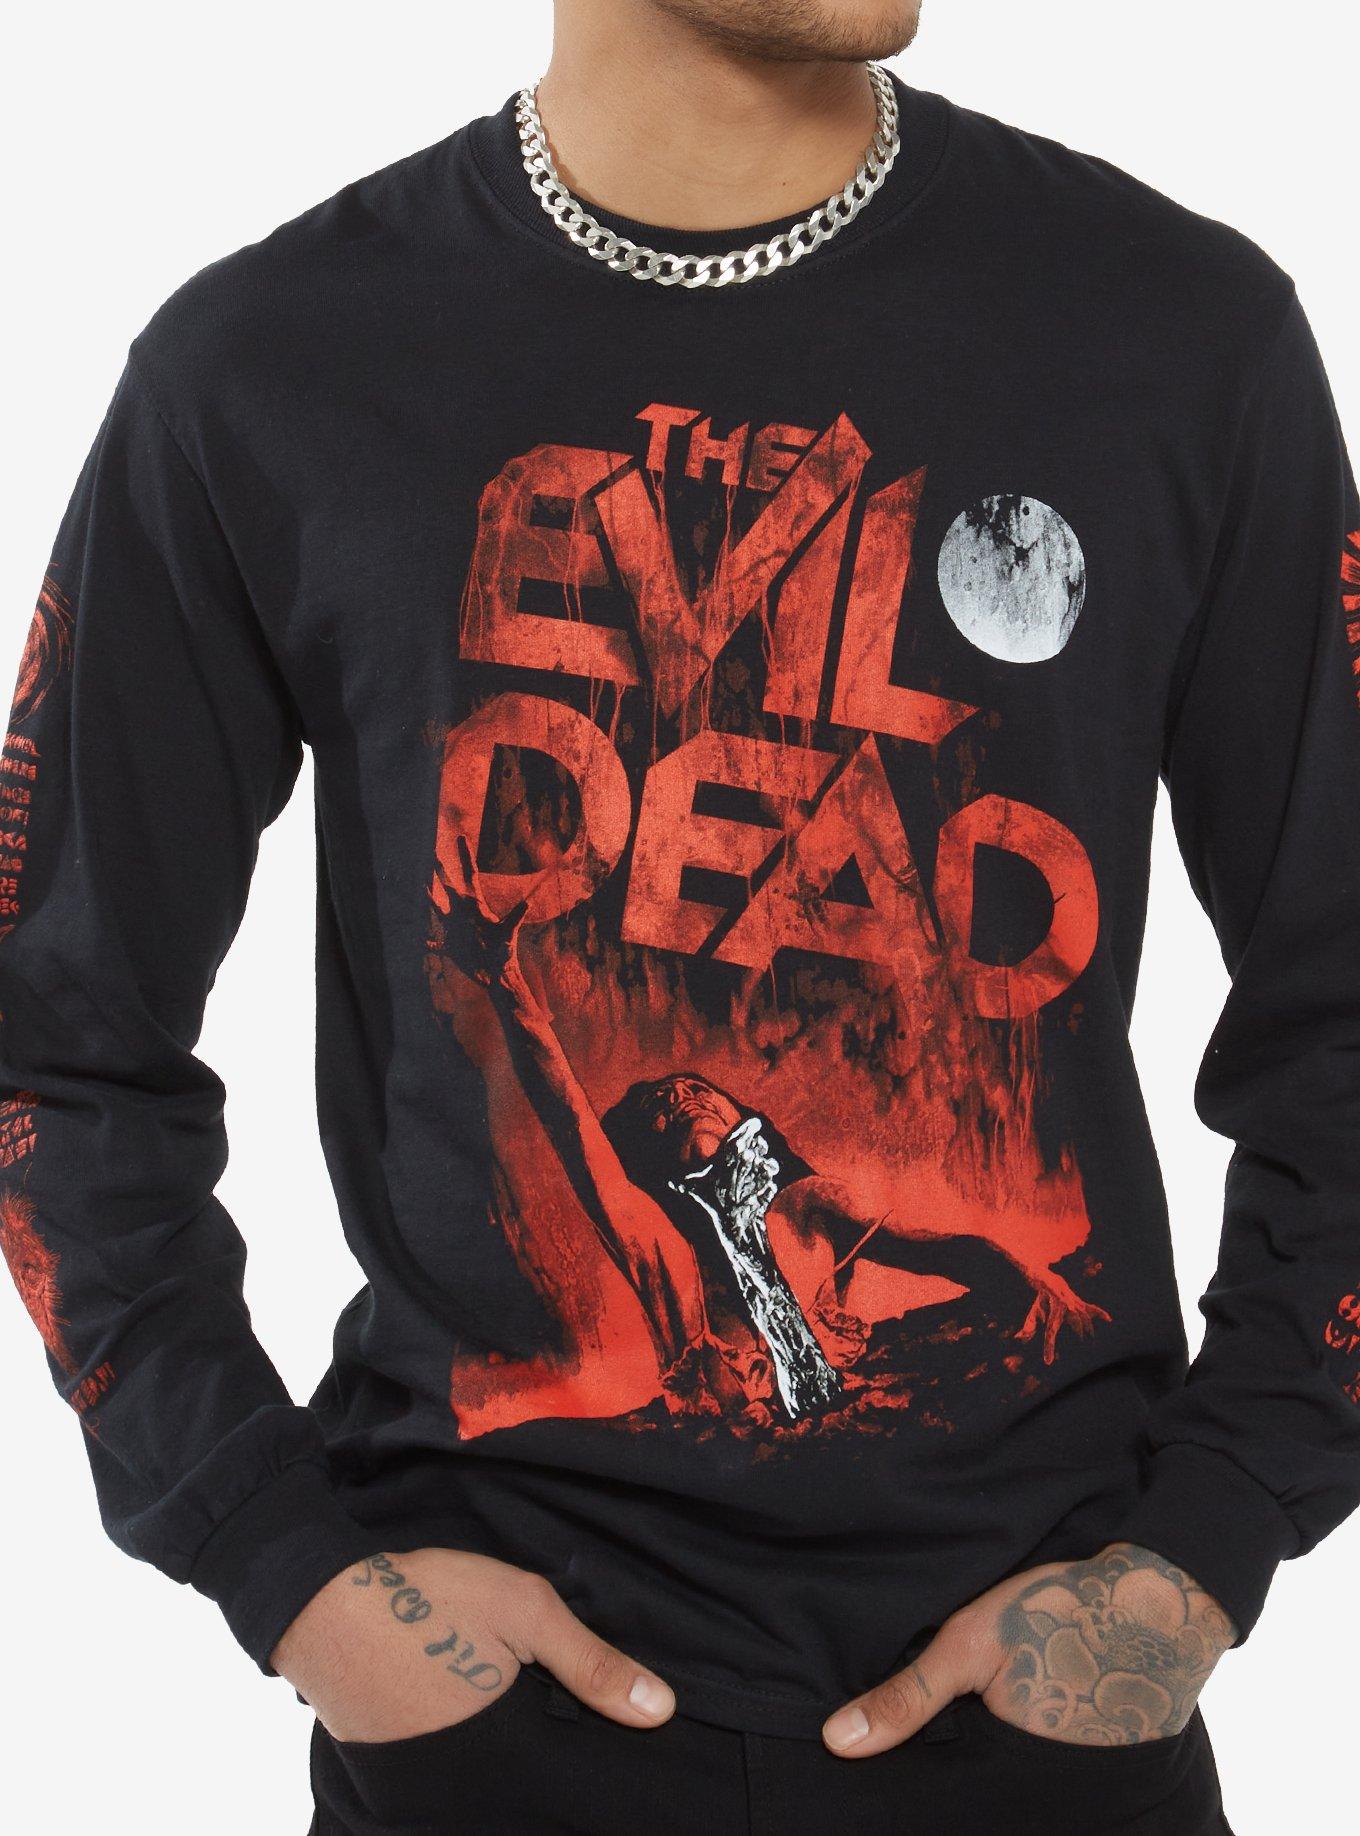 The Evil Dead Poster Long-Sleeve T-Shirt By Fright Rags